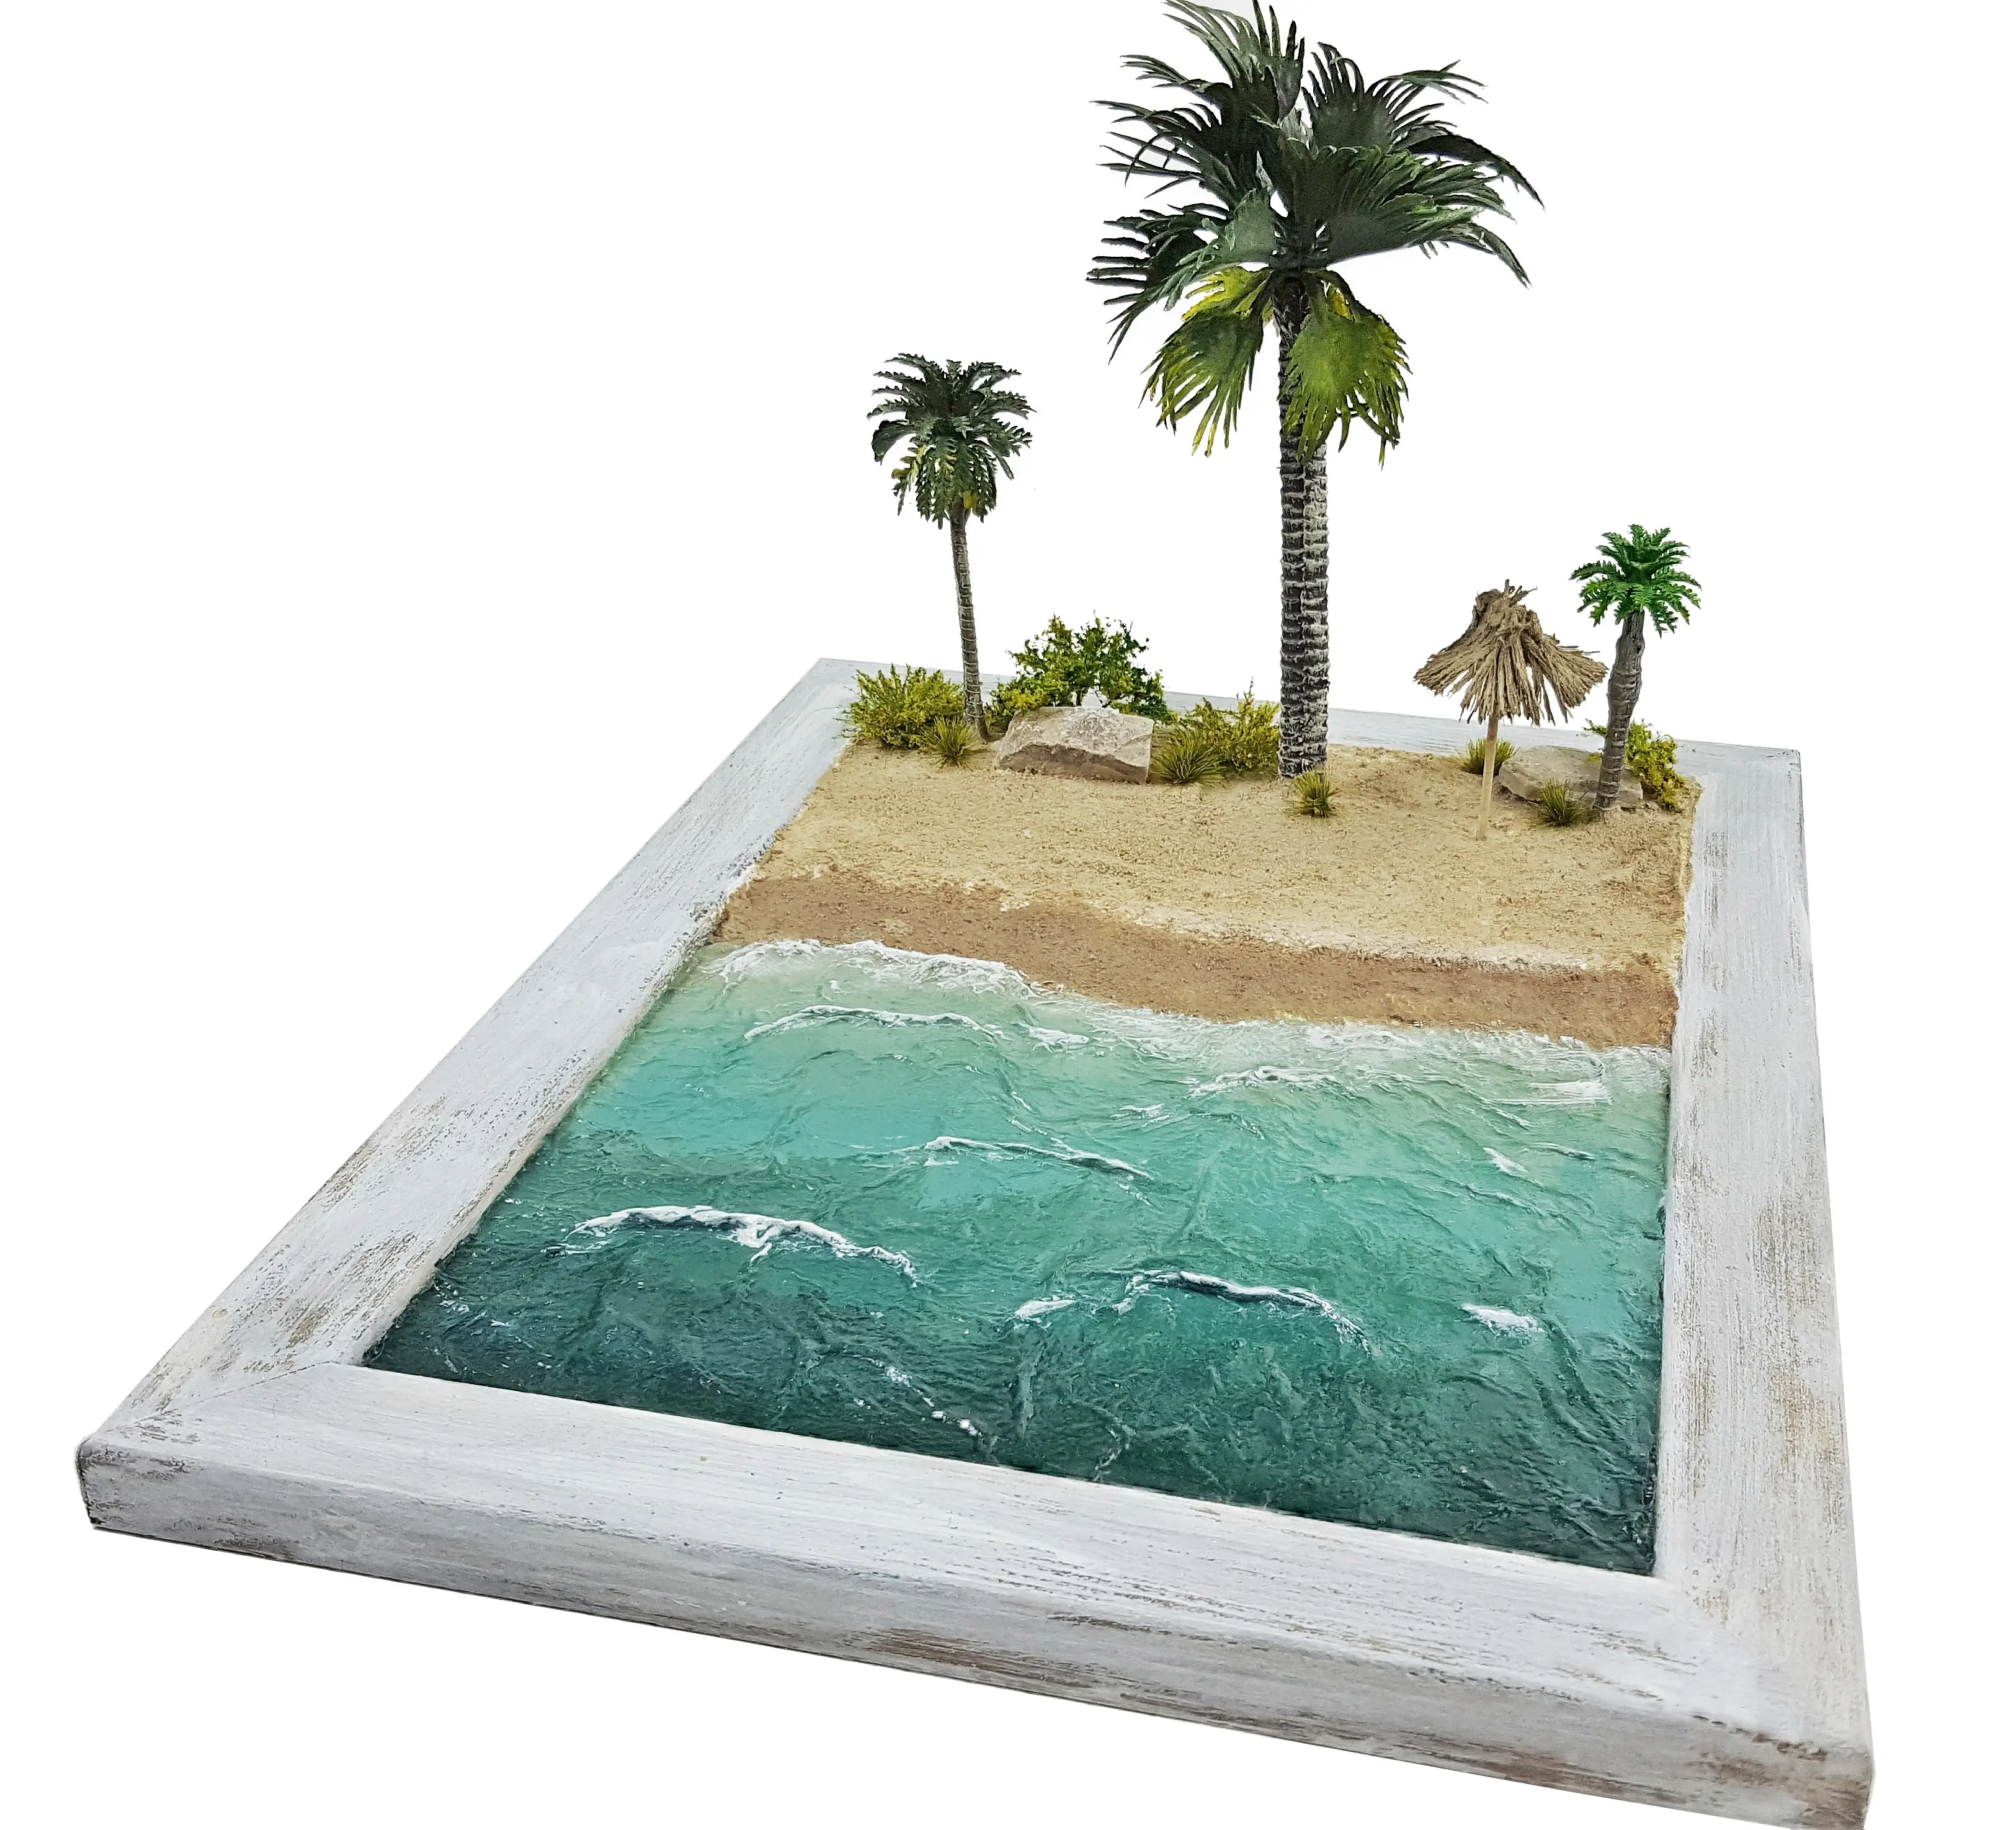 Diorama of palm trees on the beach